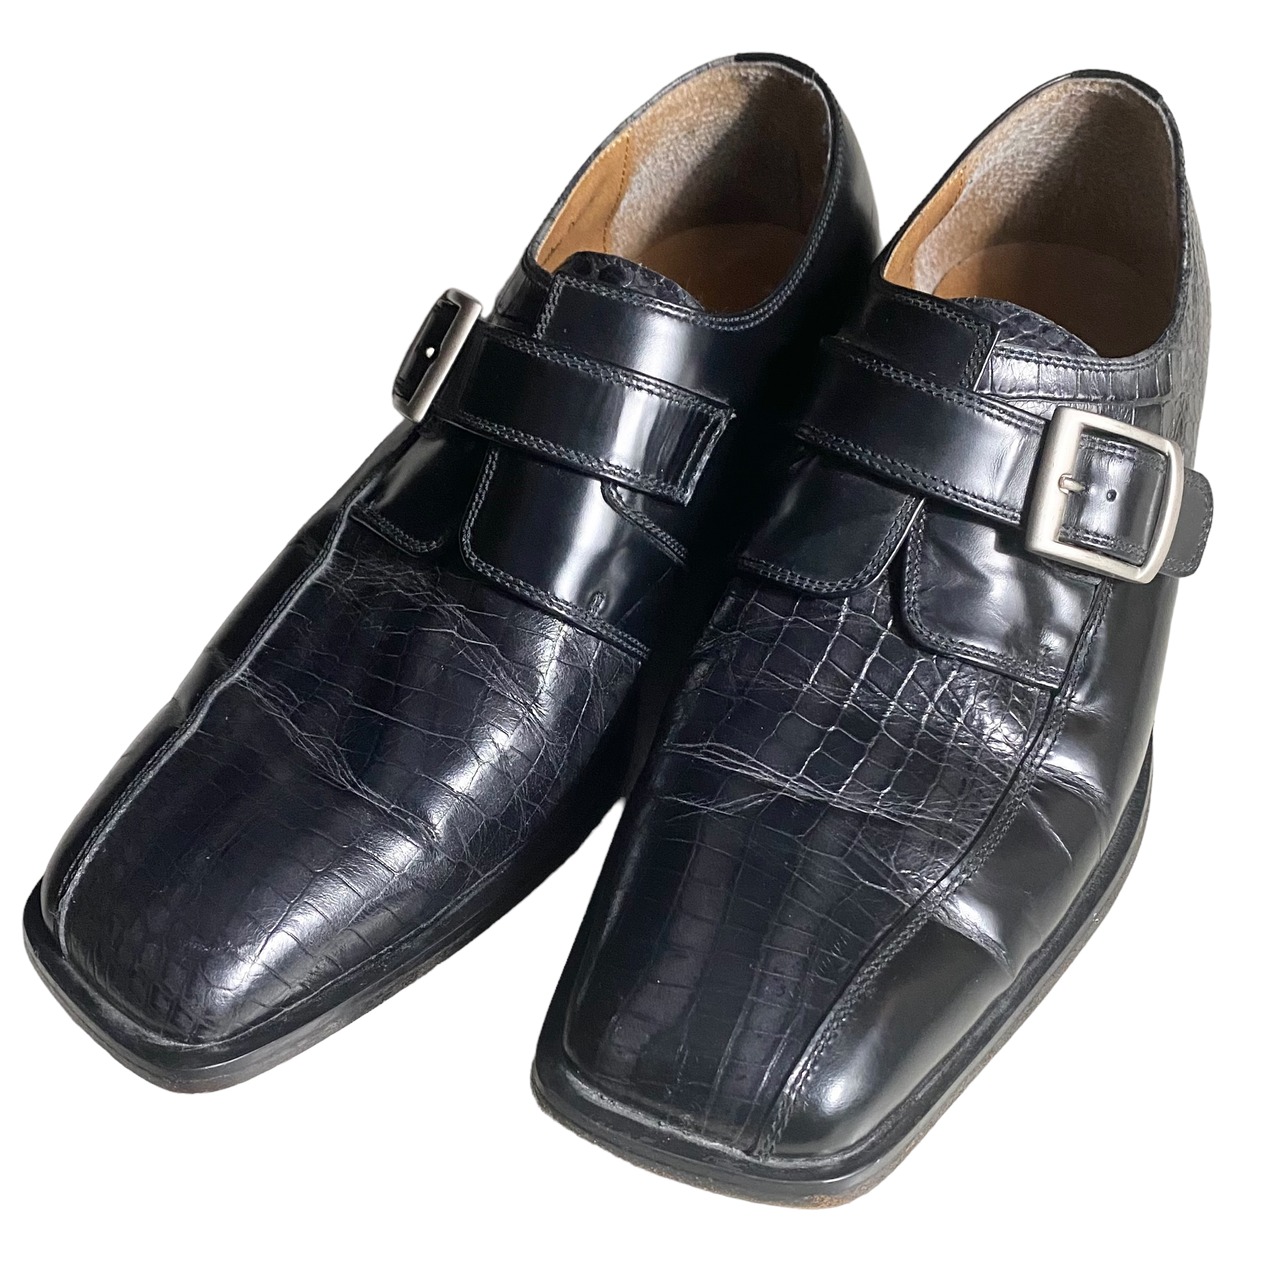 STACY ADAMS monk strap shoes